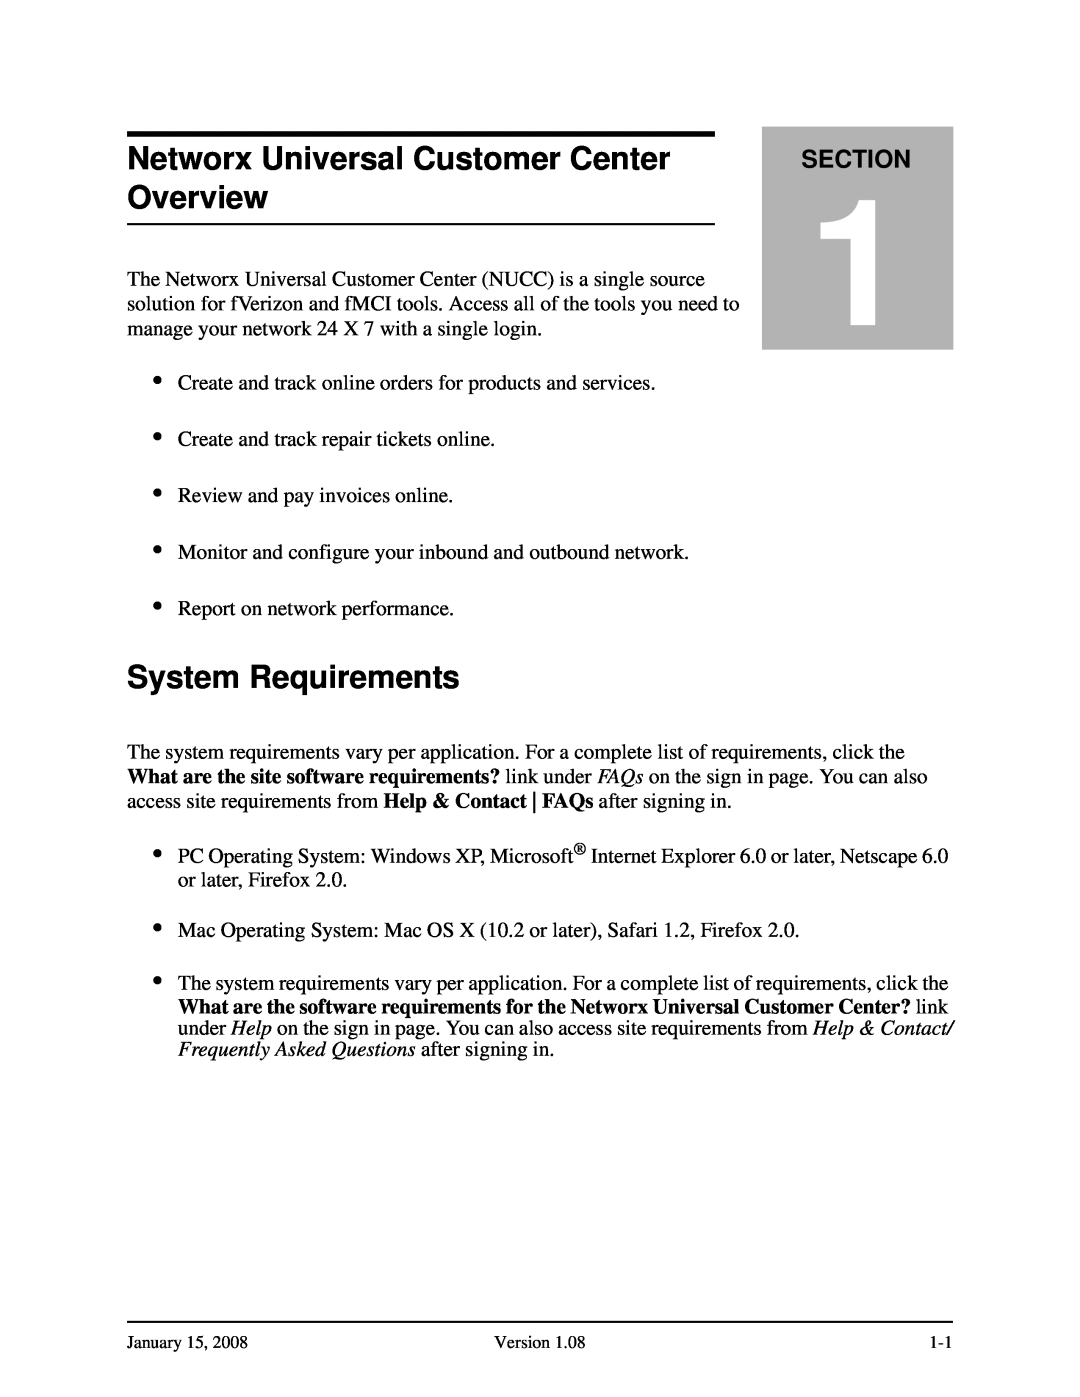 Verizon Network Manager Nodes manual Networx Universal Customer Center Overview, System Requirements, Section 